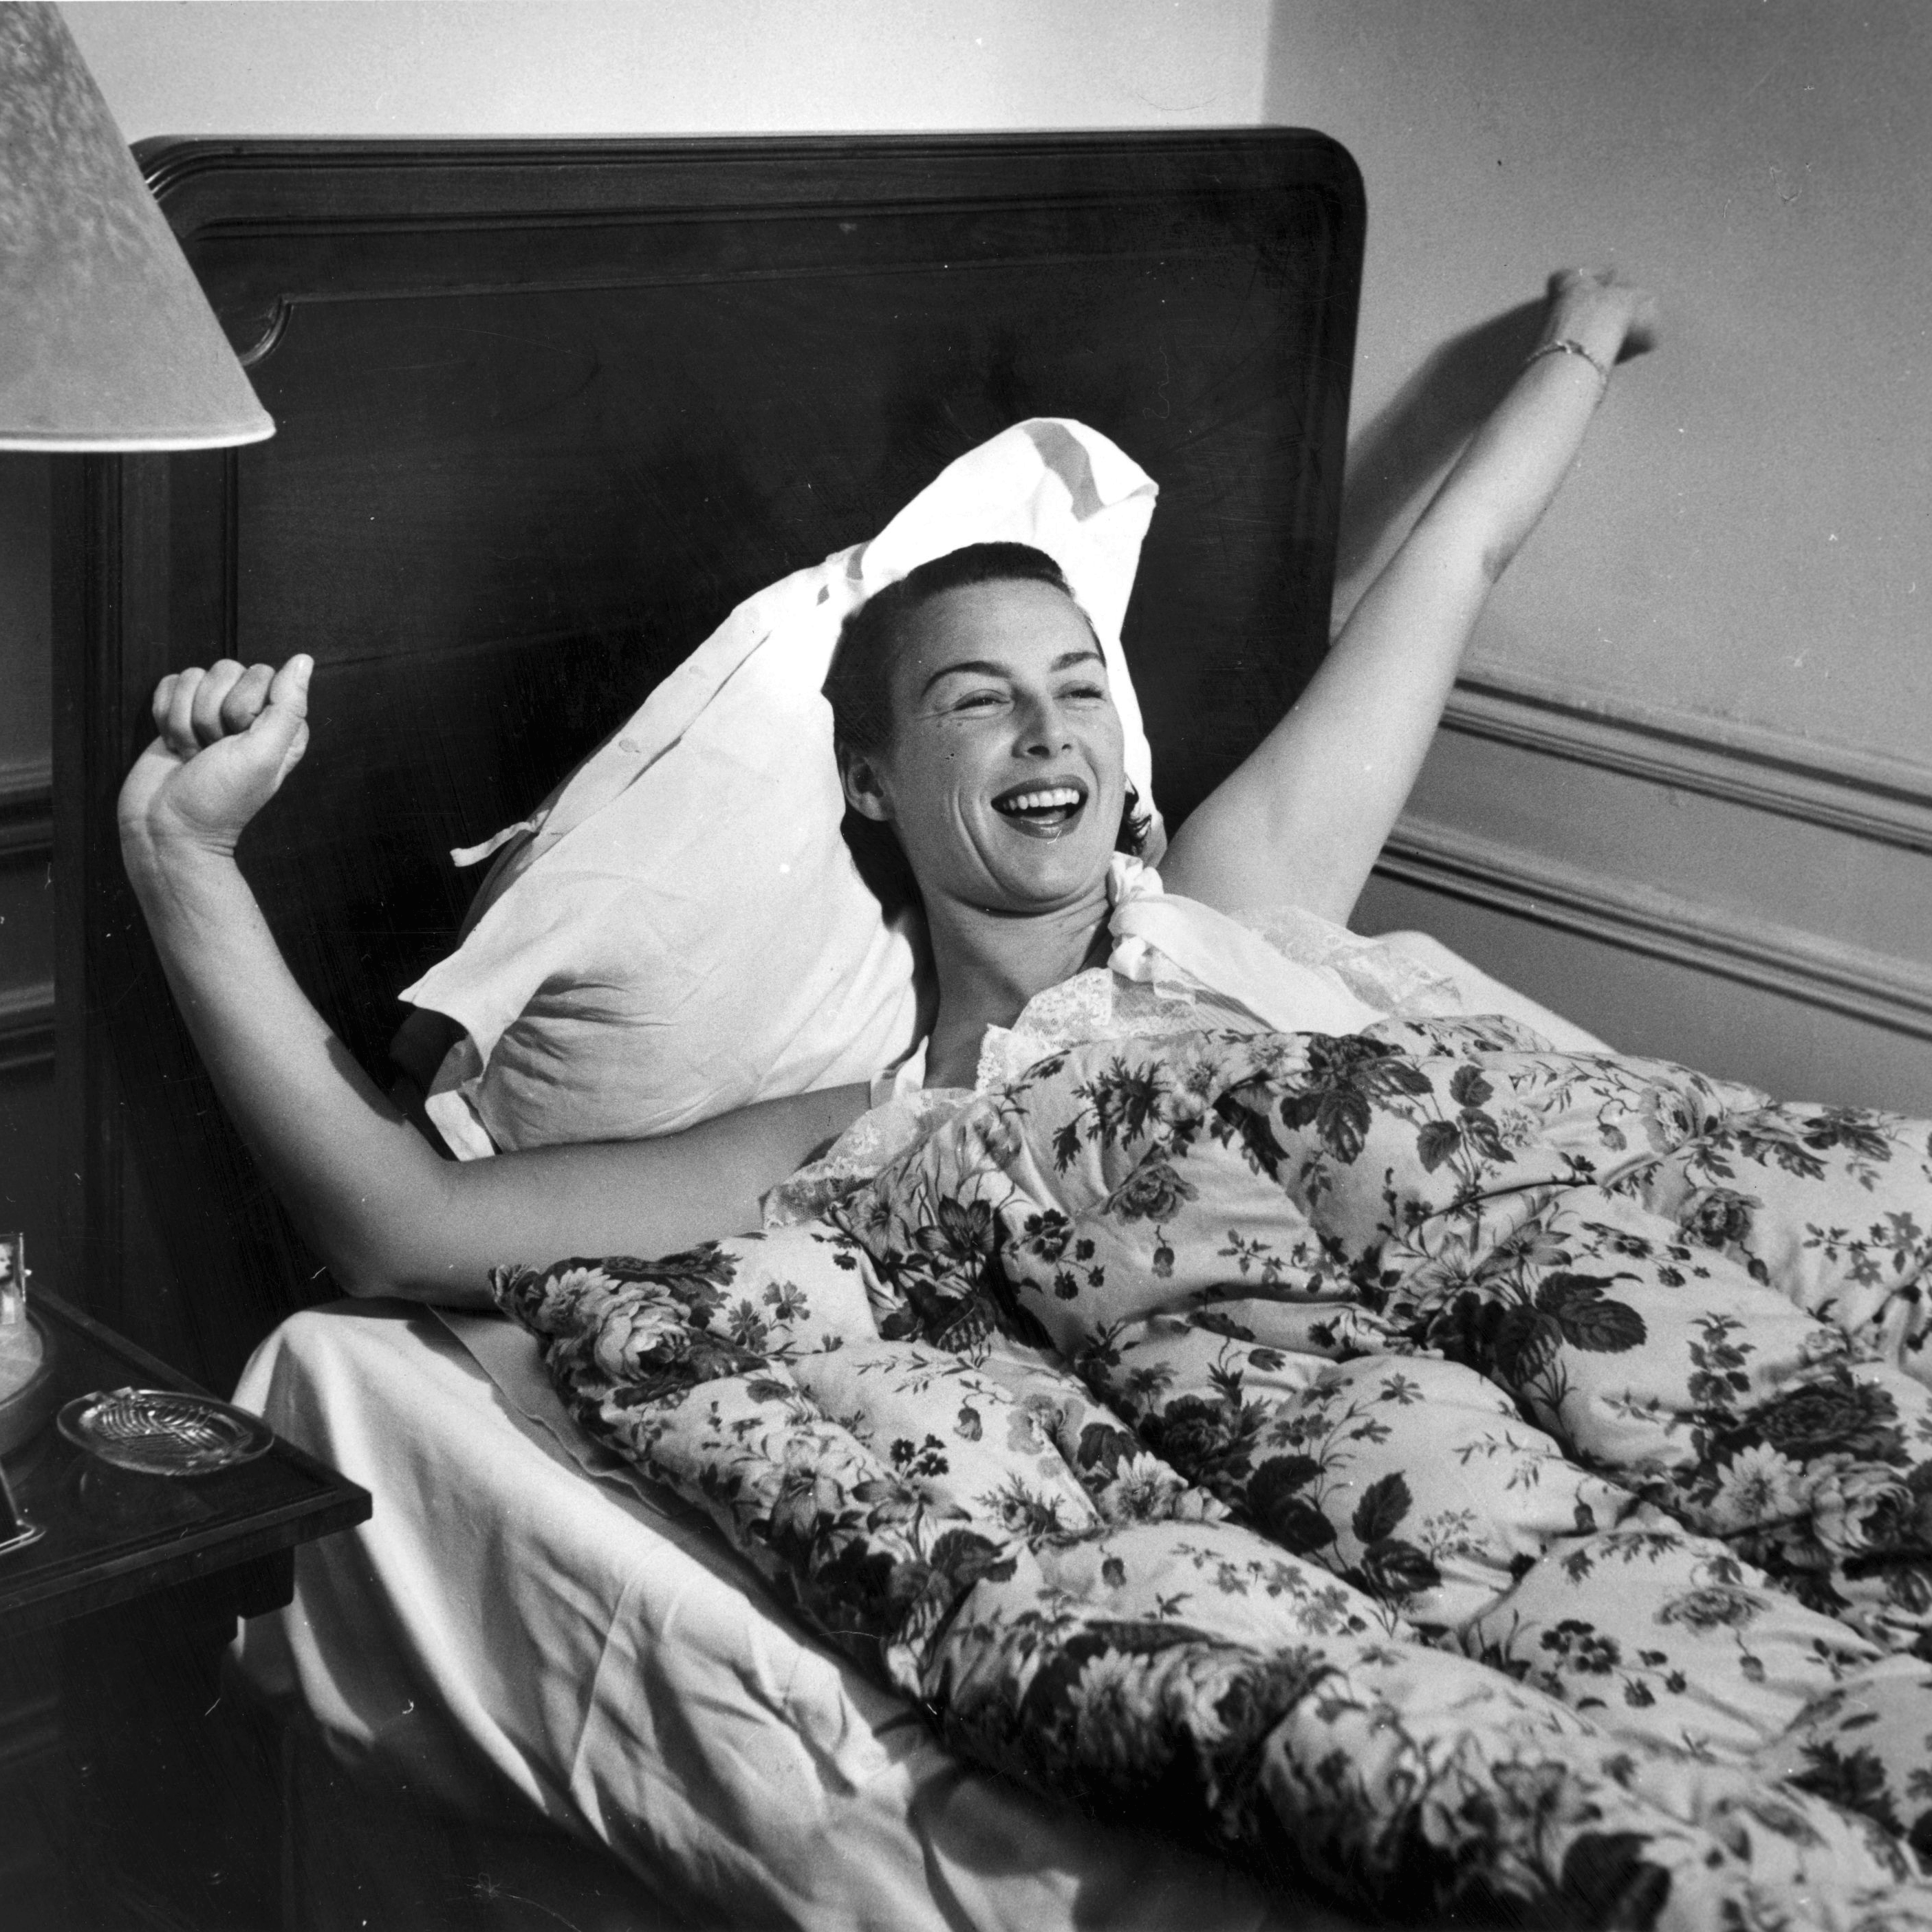 Vintage image of woman waking up in bed